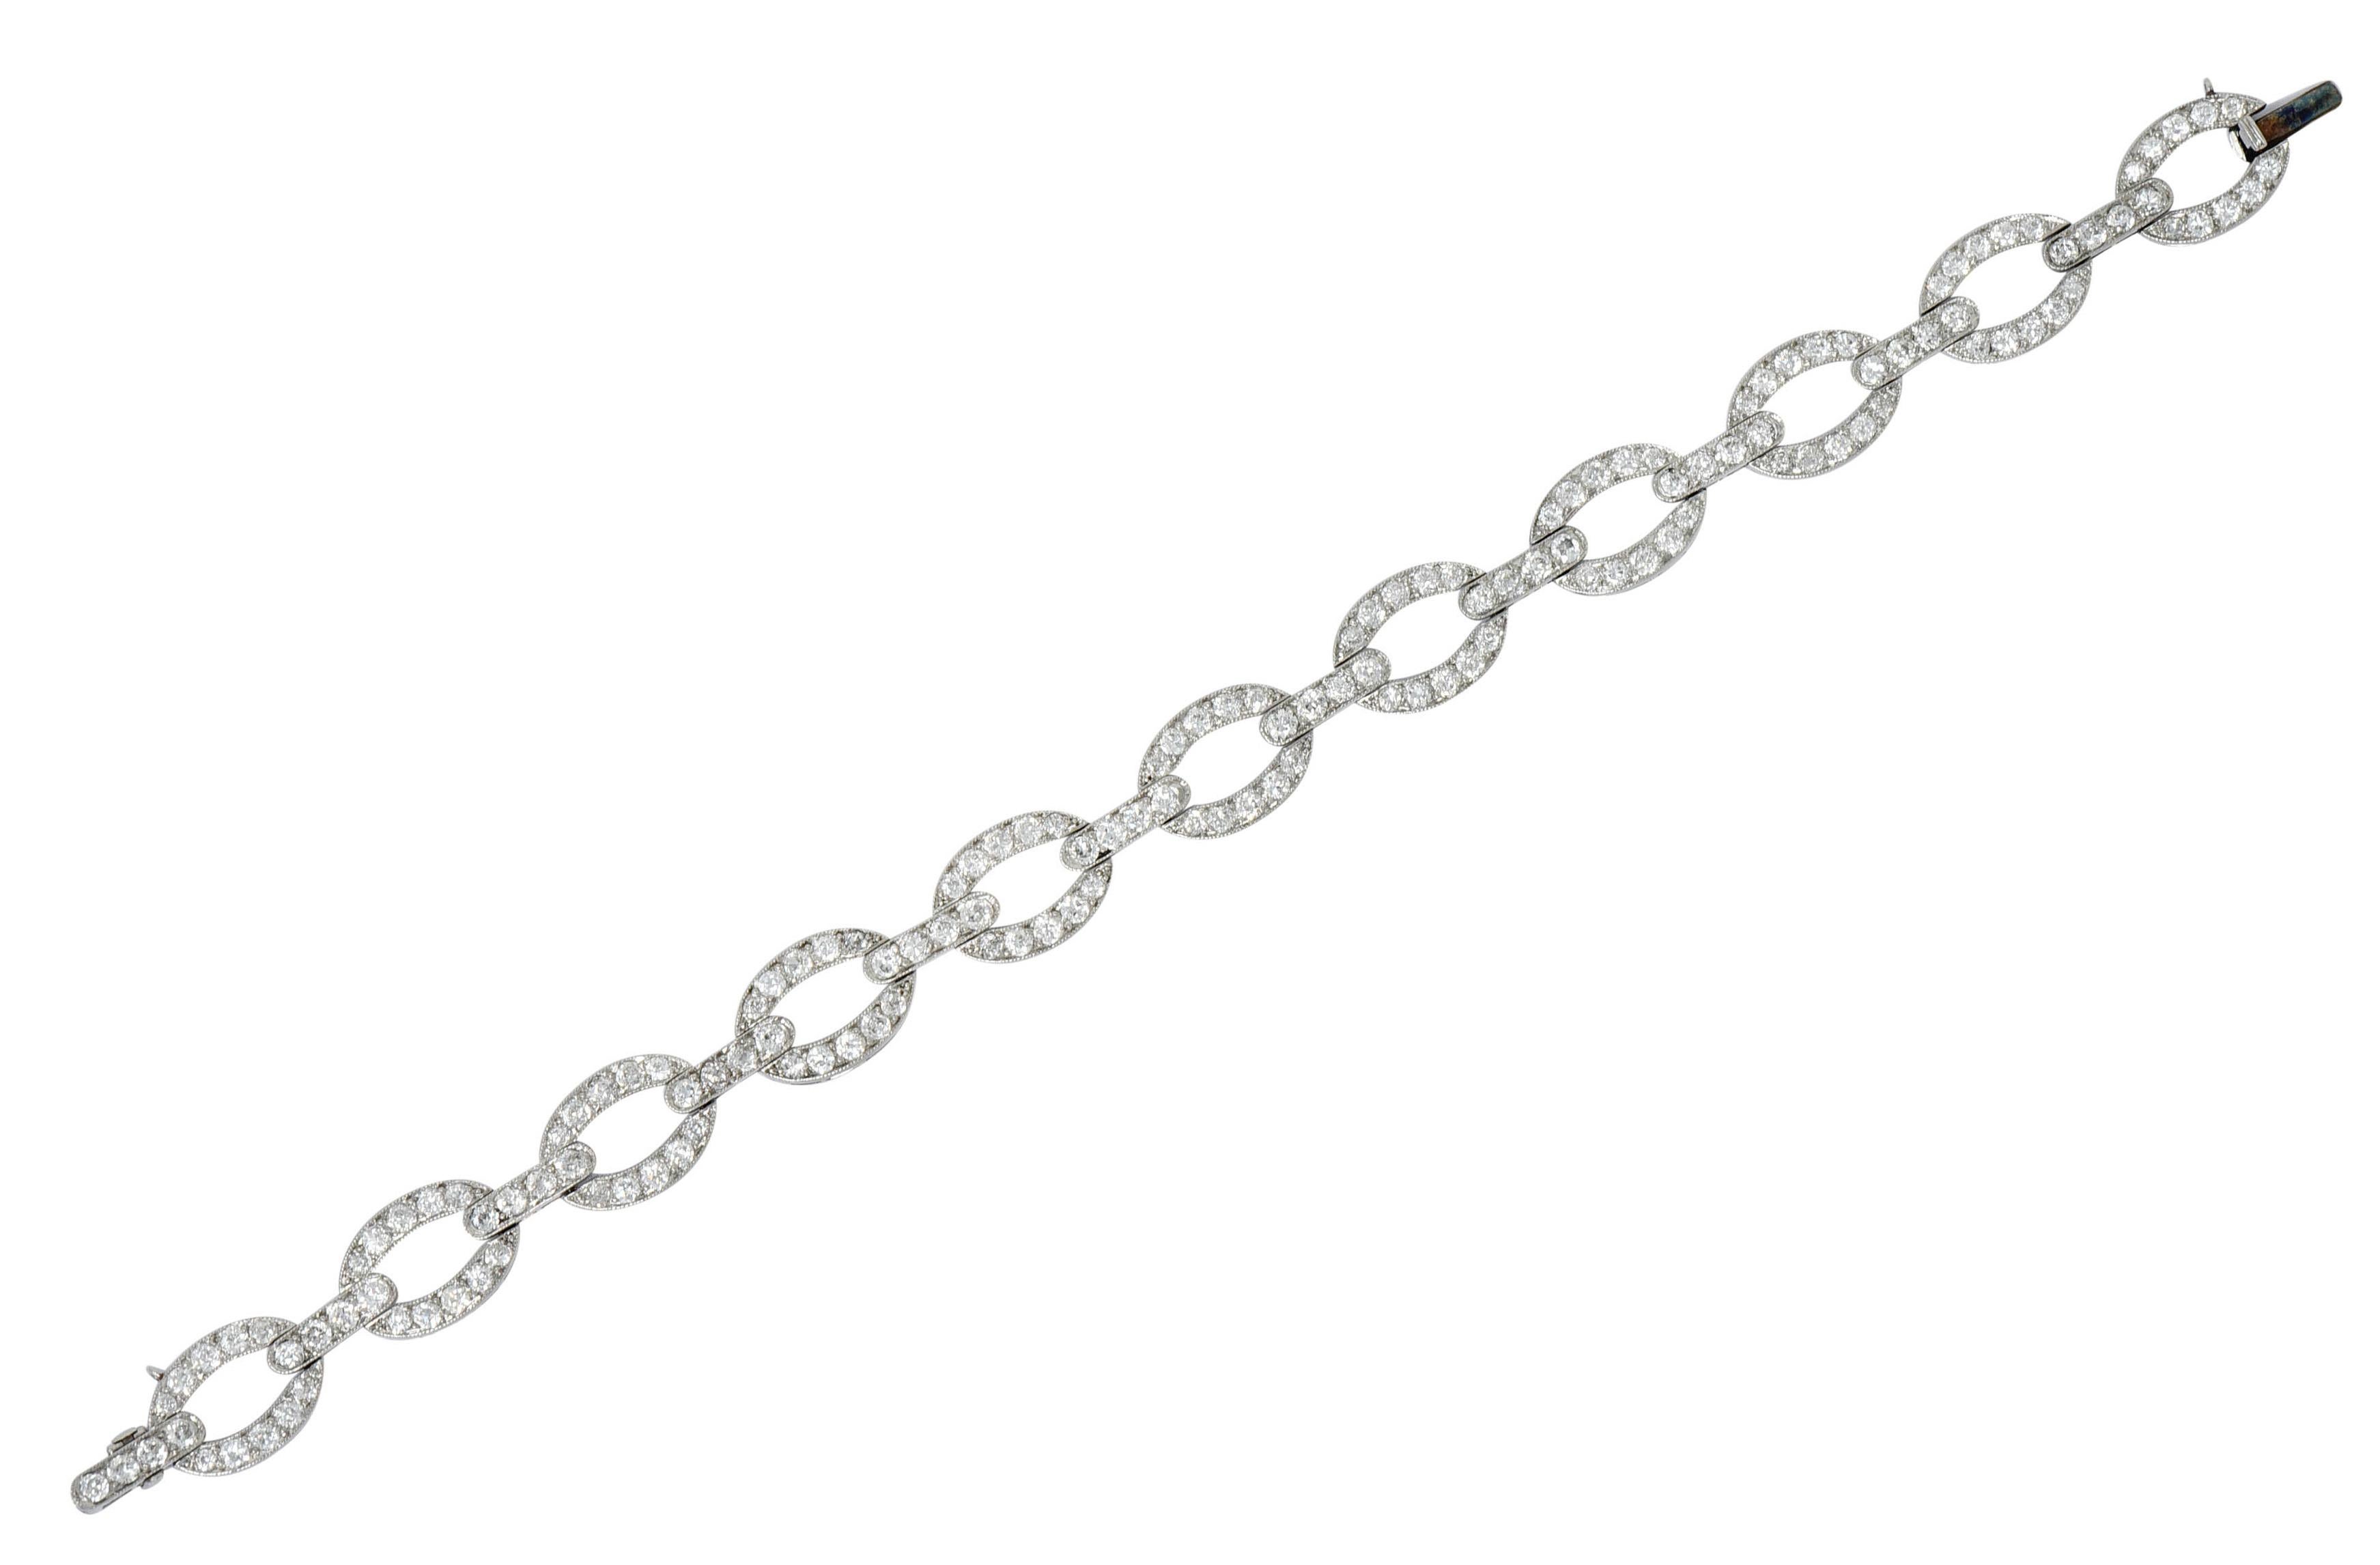 Bracelet is comprised of oval links alternating with bar spacer links

Accented by milgrain and bead set throughout by transitional cut diamonds

Weighing in total approximately 4.25 carats with G to J color and SI clarity

Completed by a concealed